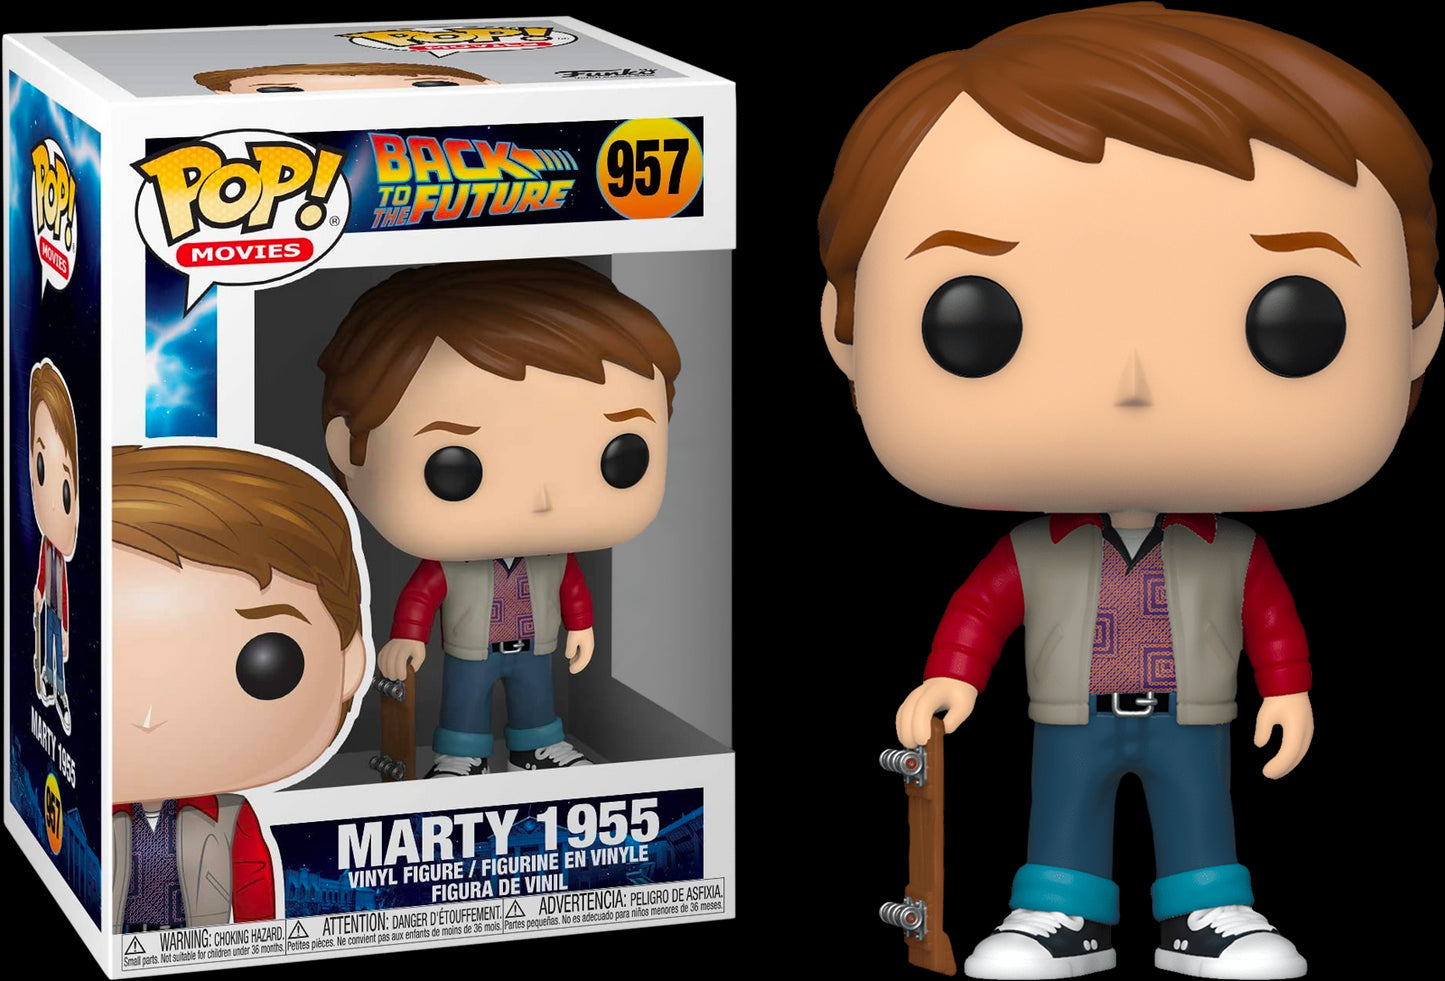 POP! MOVIES: BACK TO THE FUTURE: MARTY MCFLY 1955